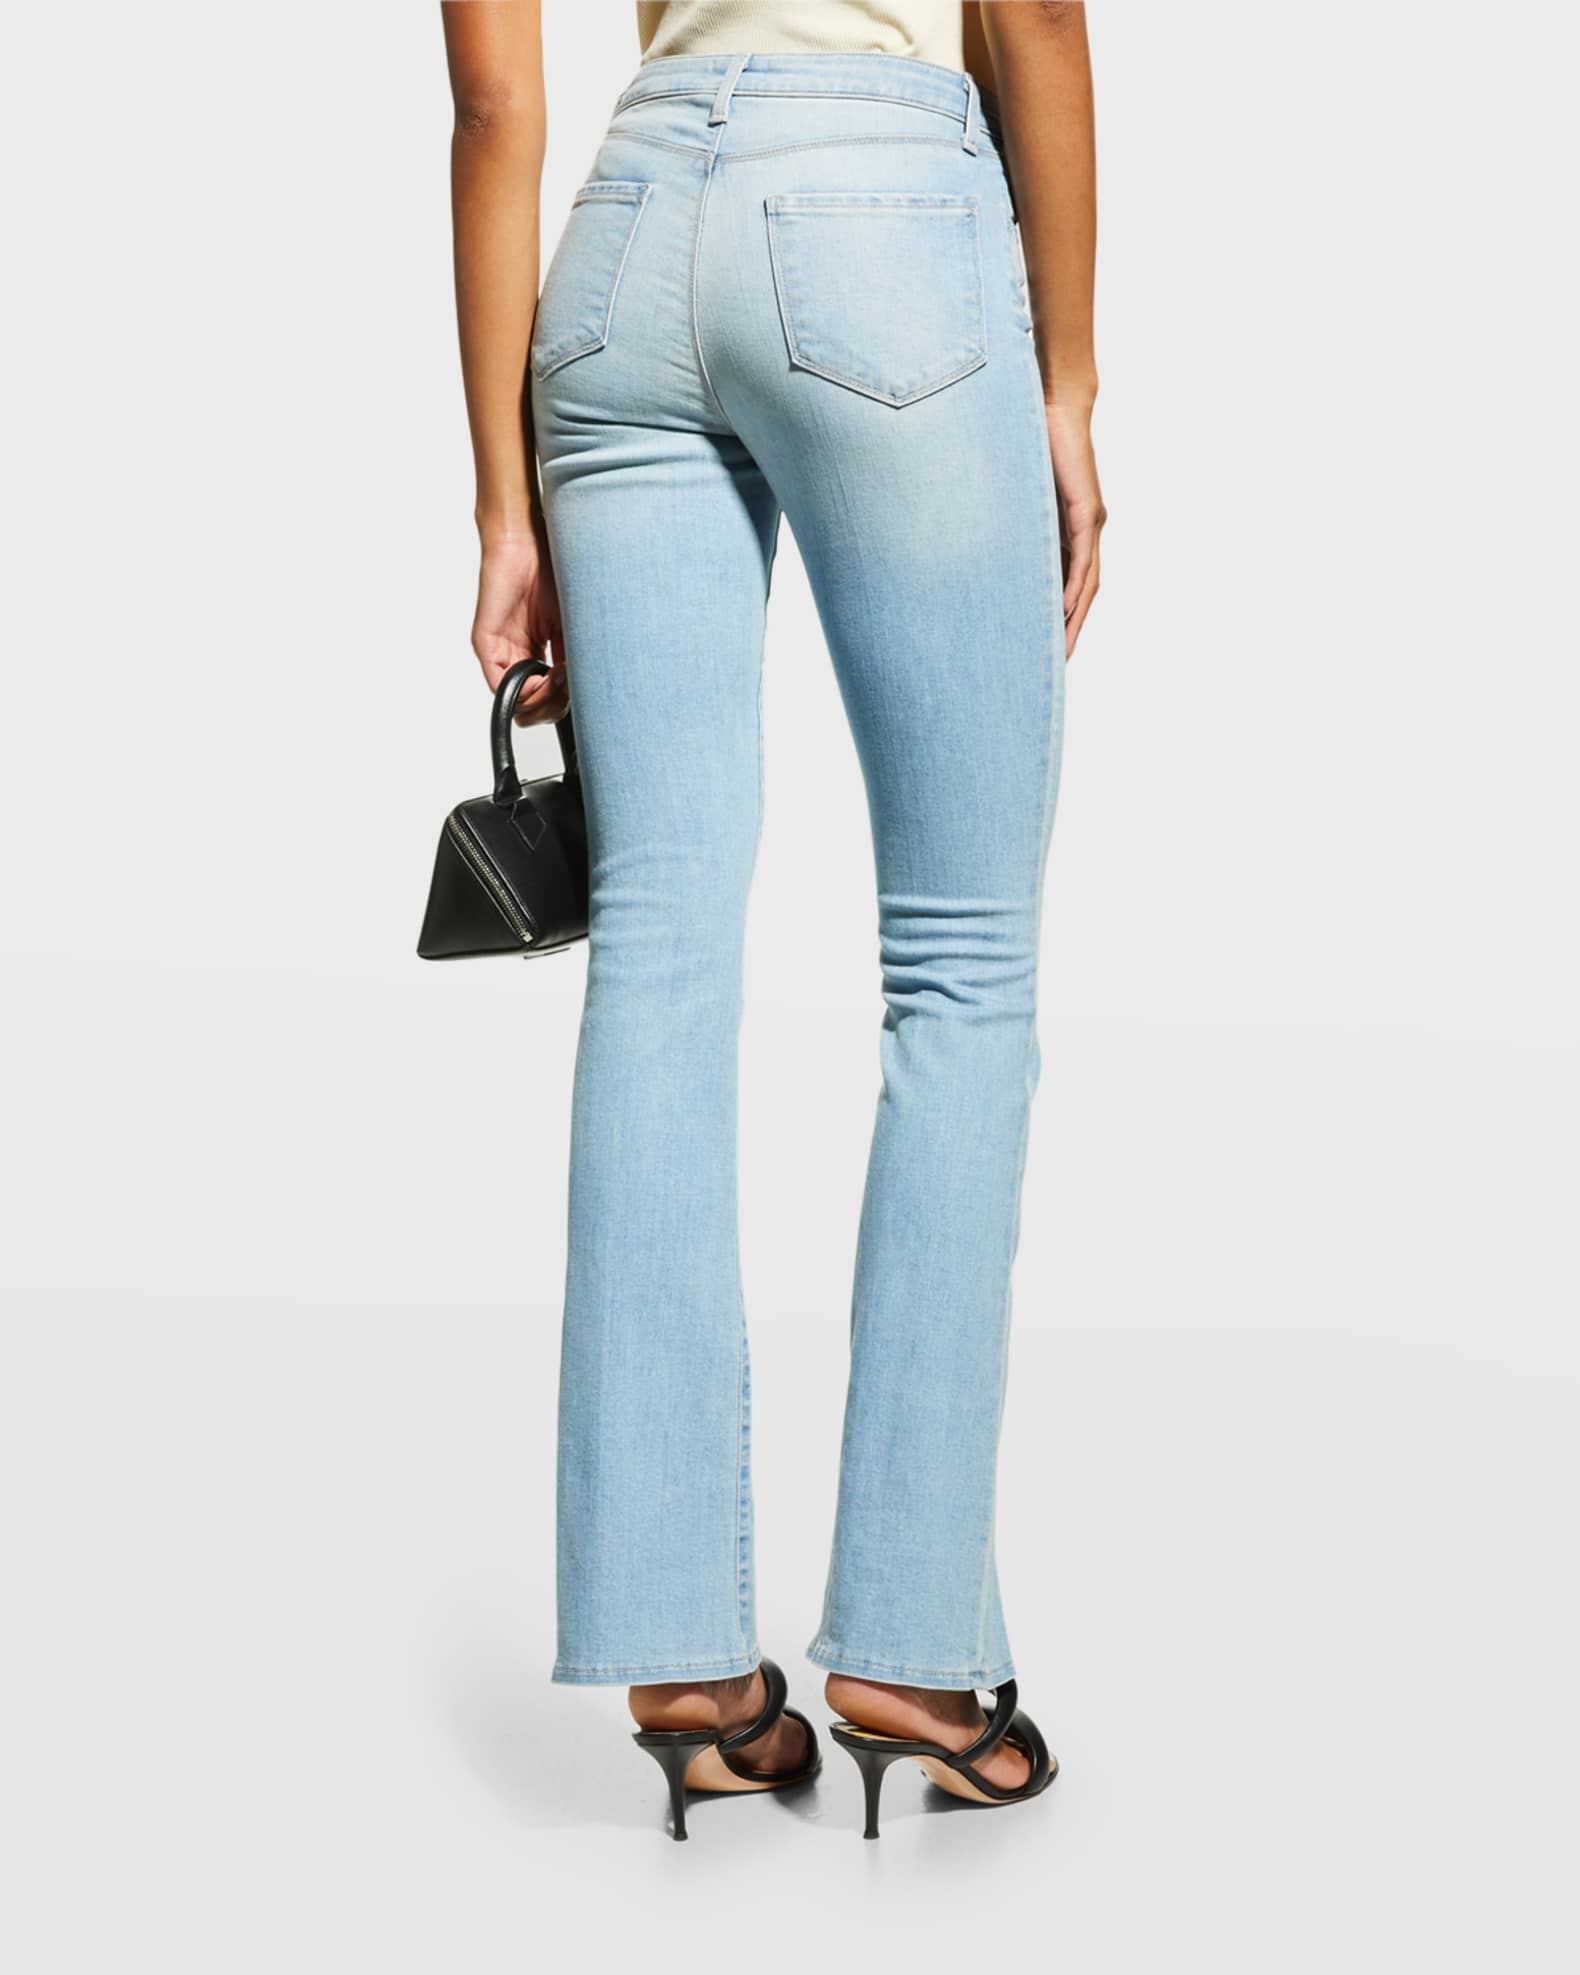 Revolve Clothing Jeans High Waisted Jeans Selma High Rise Sleek Baby Boot in Denim-Light. 